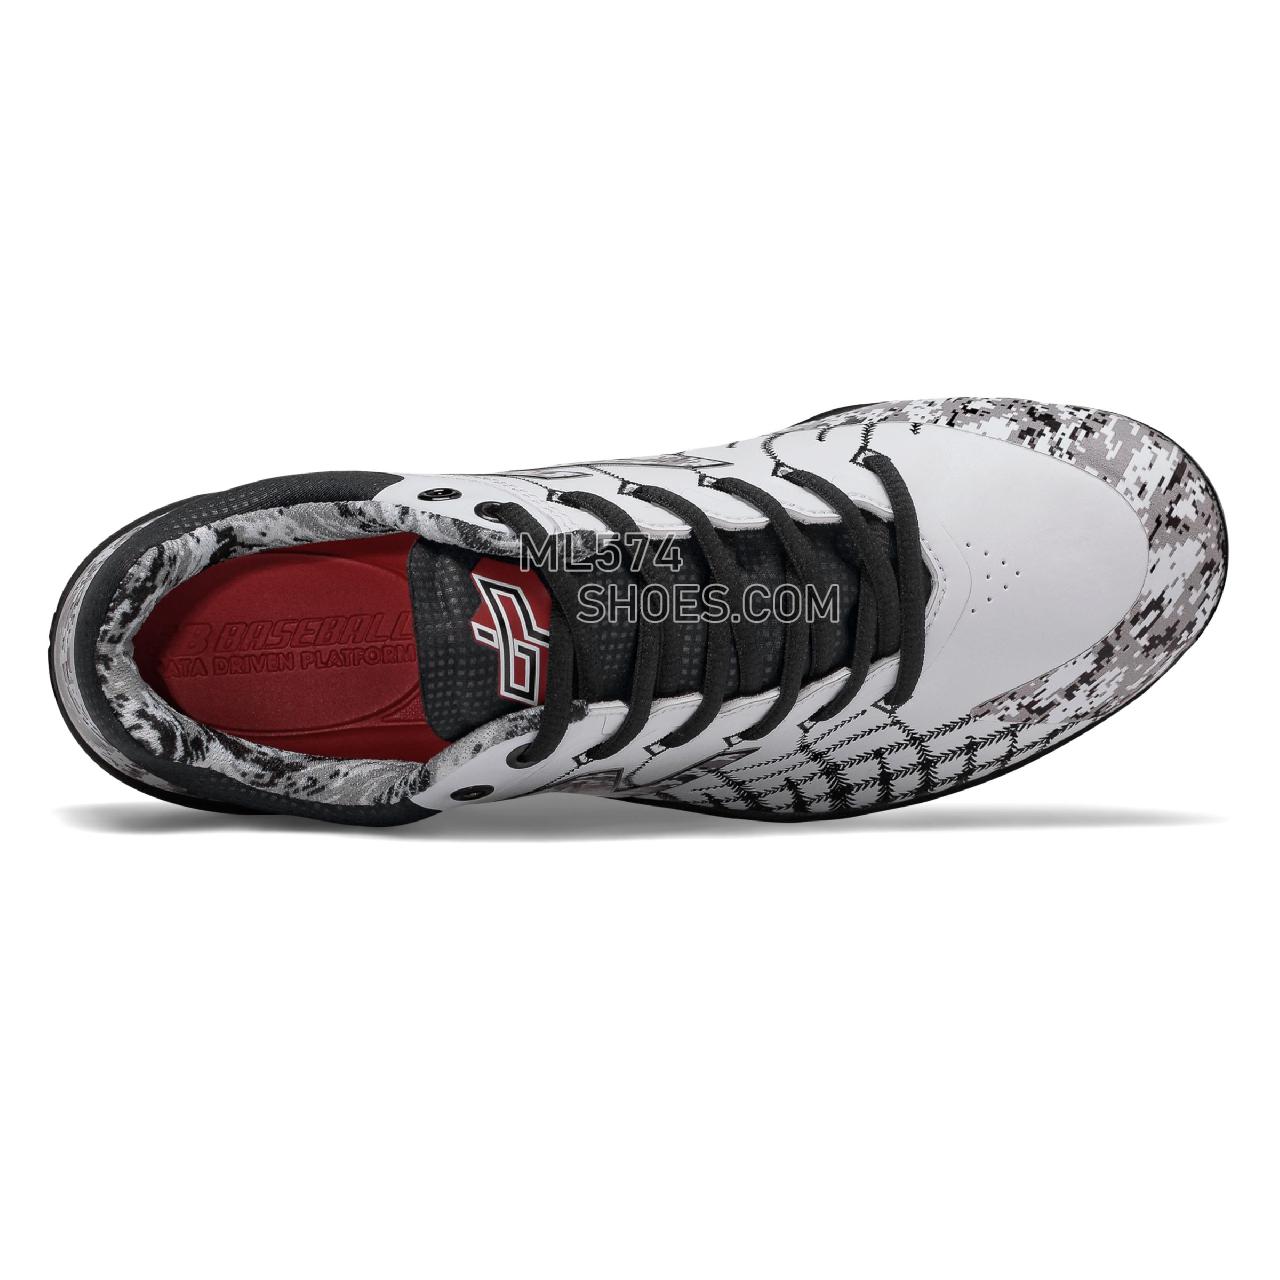 New Balance 4040v5 Pedroia Metal - Men's Baseball Turf - White with Black Camo and Red - L4040PW5